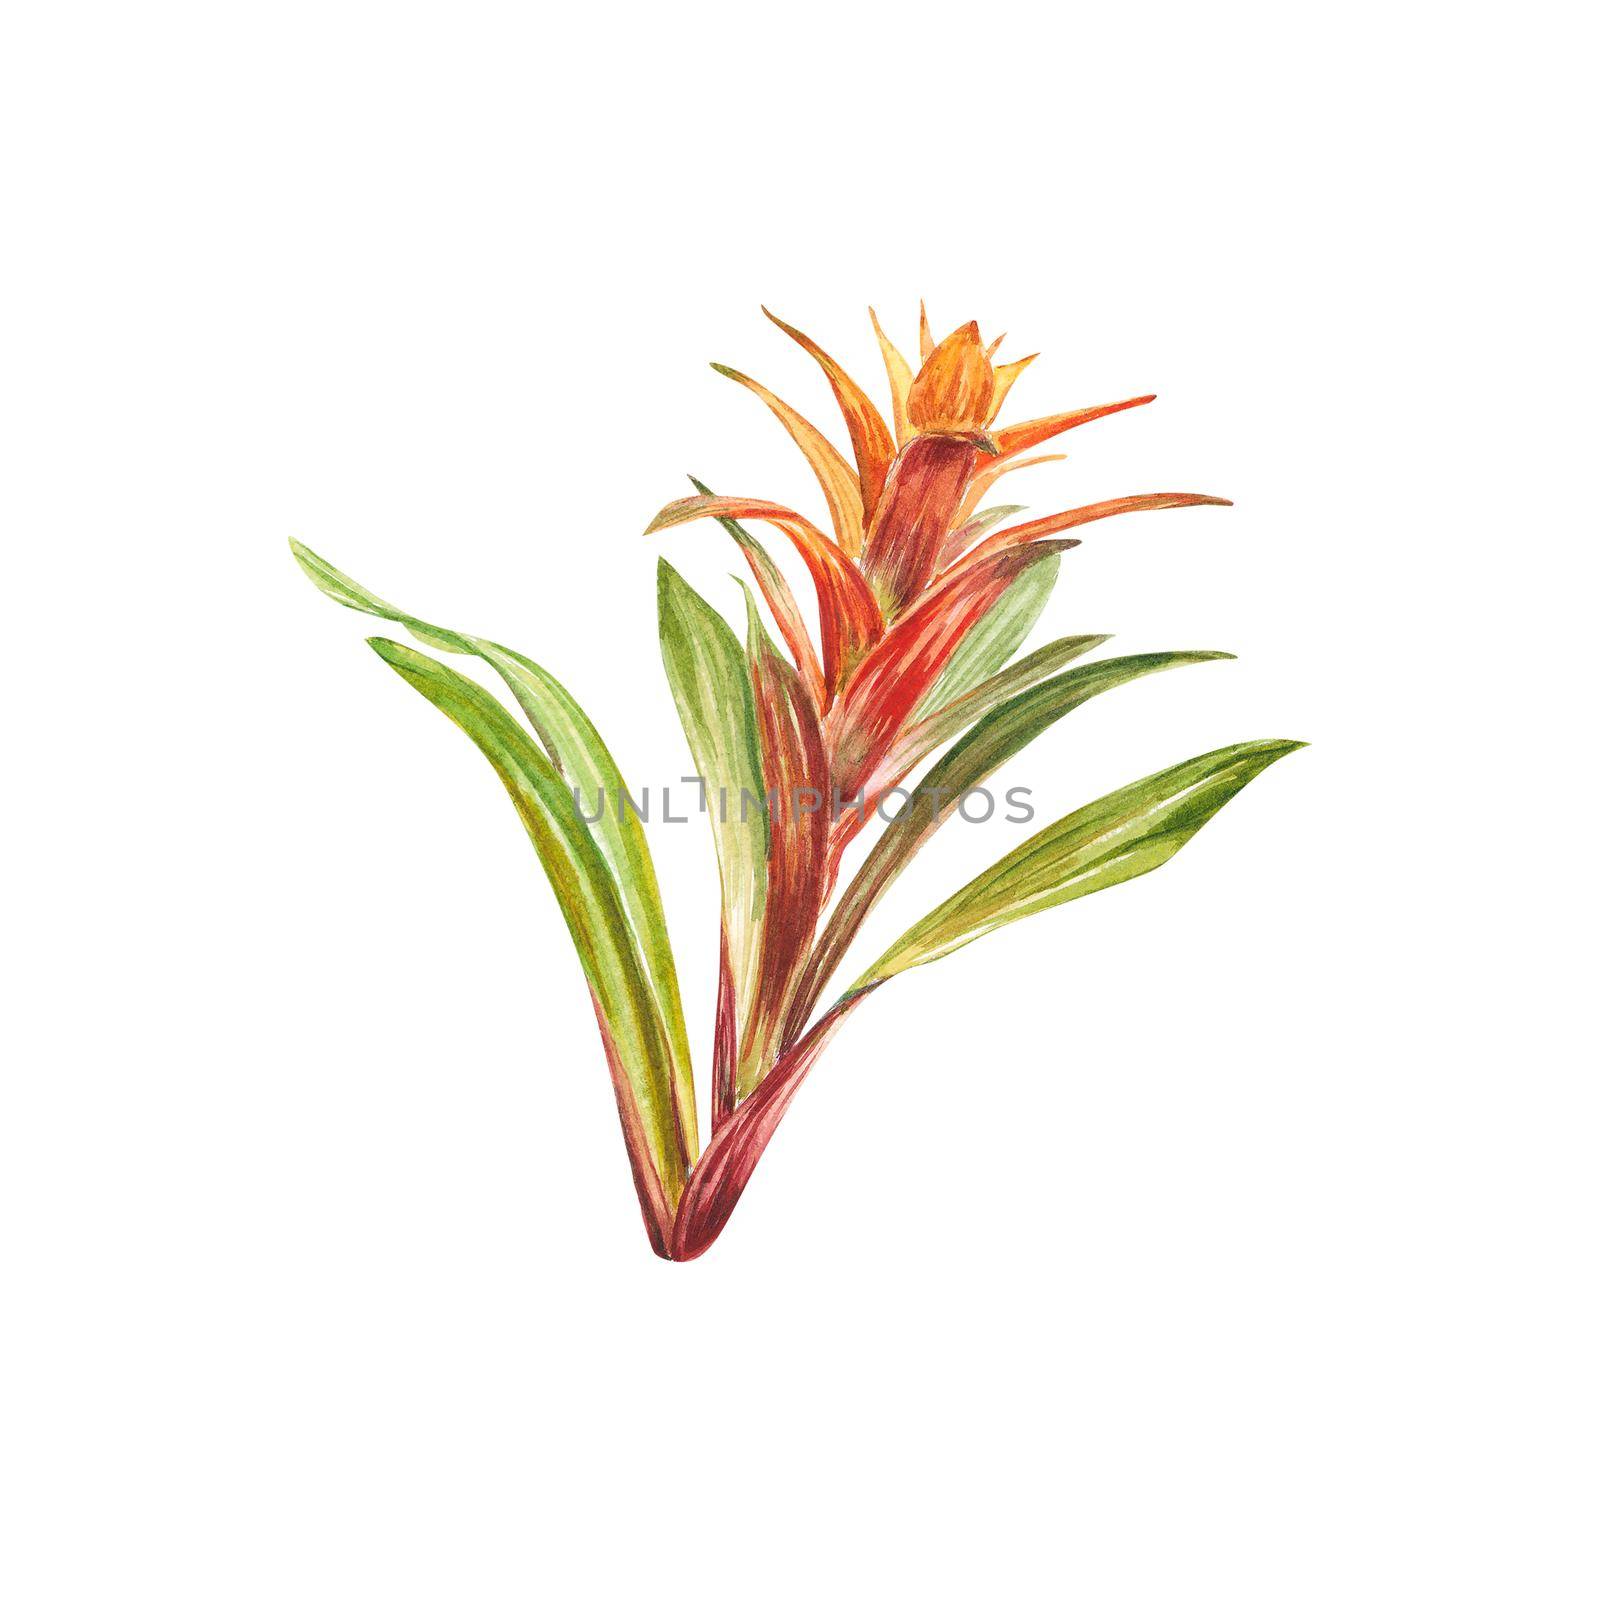 Tropical bromeliad plant with red and green leaves, hand-painted in watercolor. The illustration is highlighted on a white background. Spring or summer flower for weddings, invitations, postcards by NastyaChe